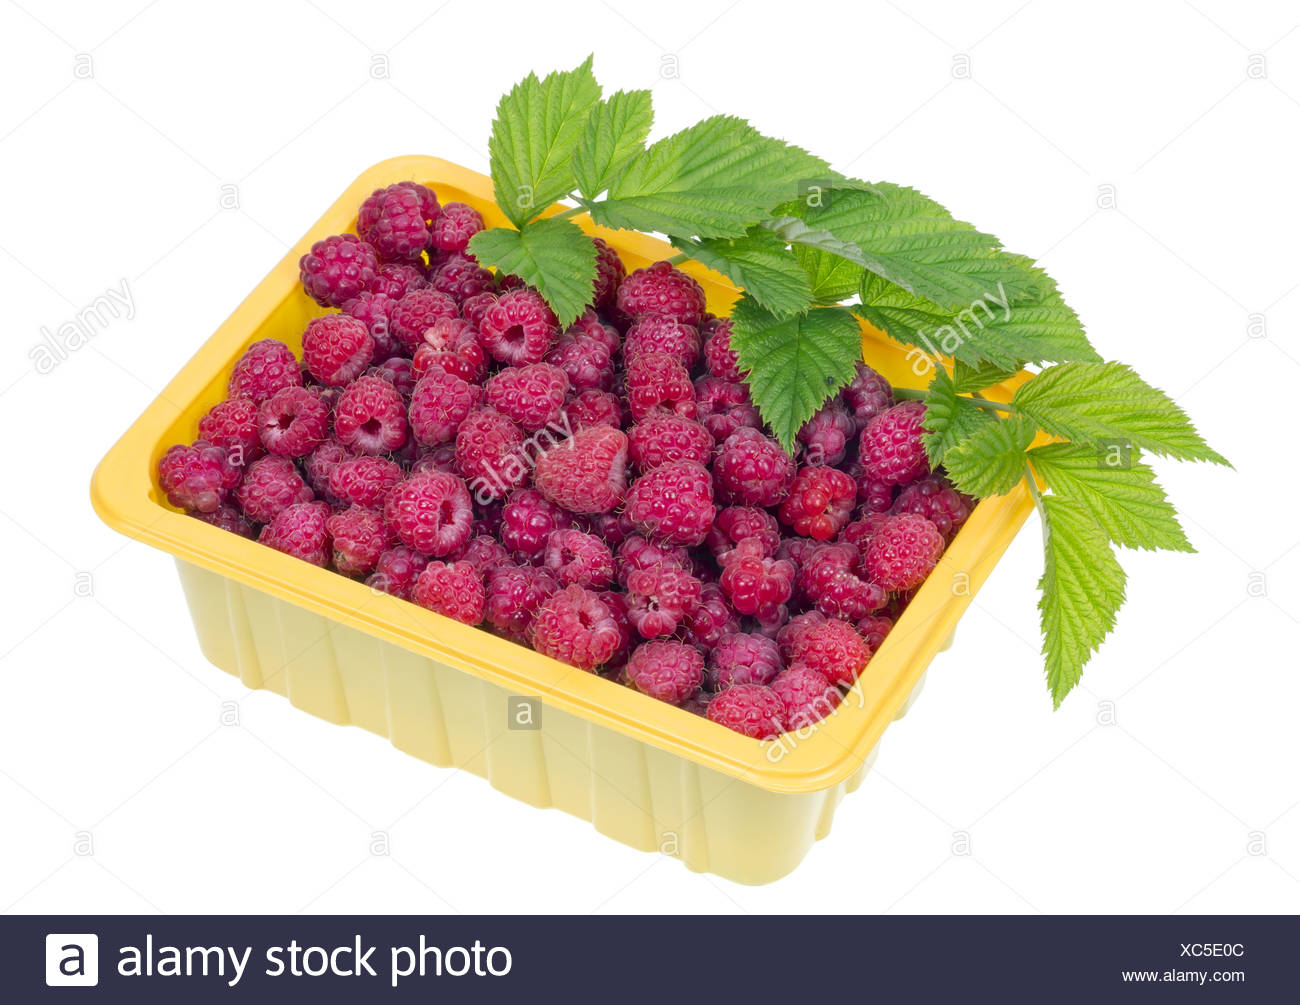 Download Raspberries In A Yellow Plastic Container Stock Photo 282862508 Alamy Yellowimages Mockups